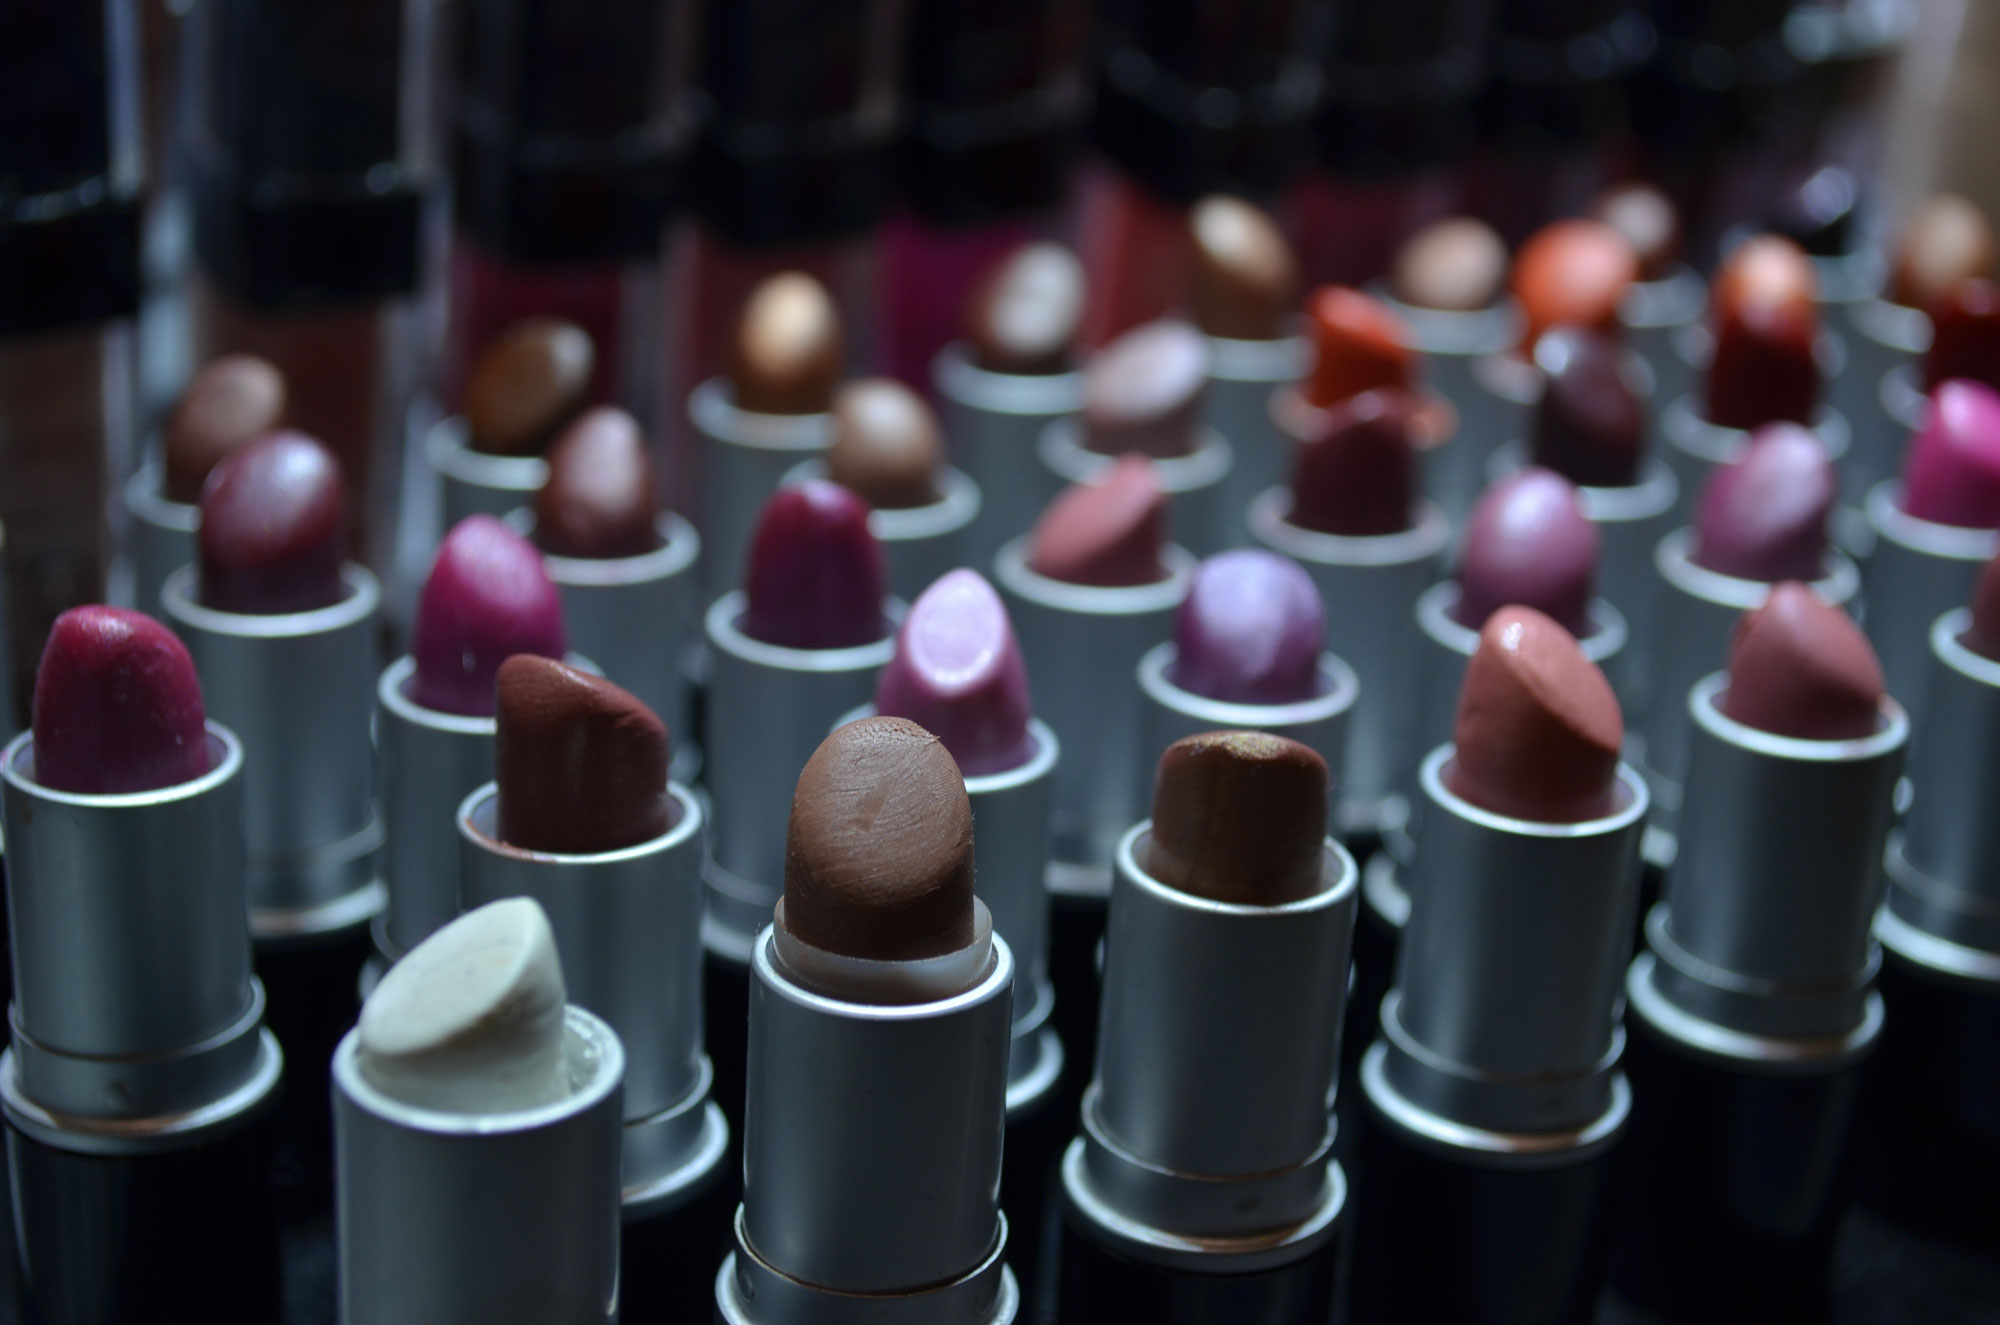 Photograph of tubes of lipstick with their caps off. The lipsticks are different colors, including white, brown, and shades of red, pink, and purple.